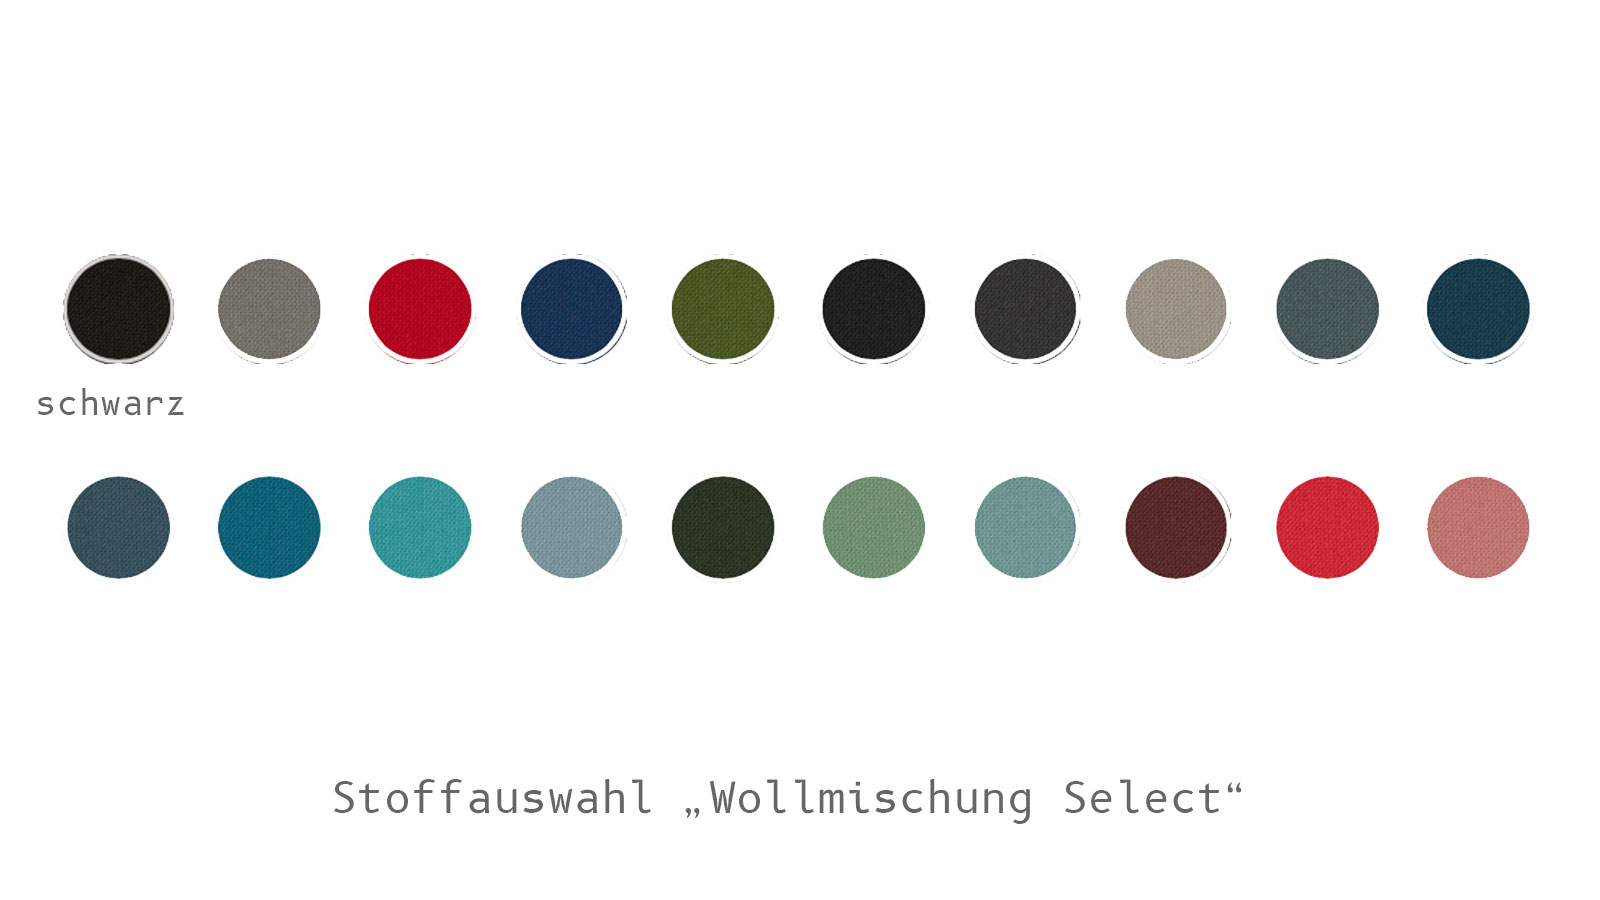 Stoffauswahl "Wollmischung Select"